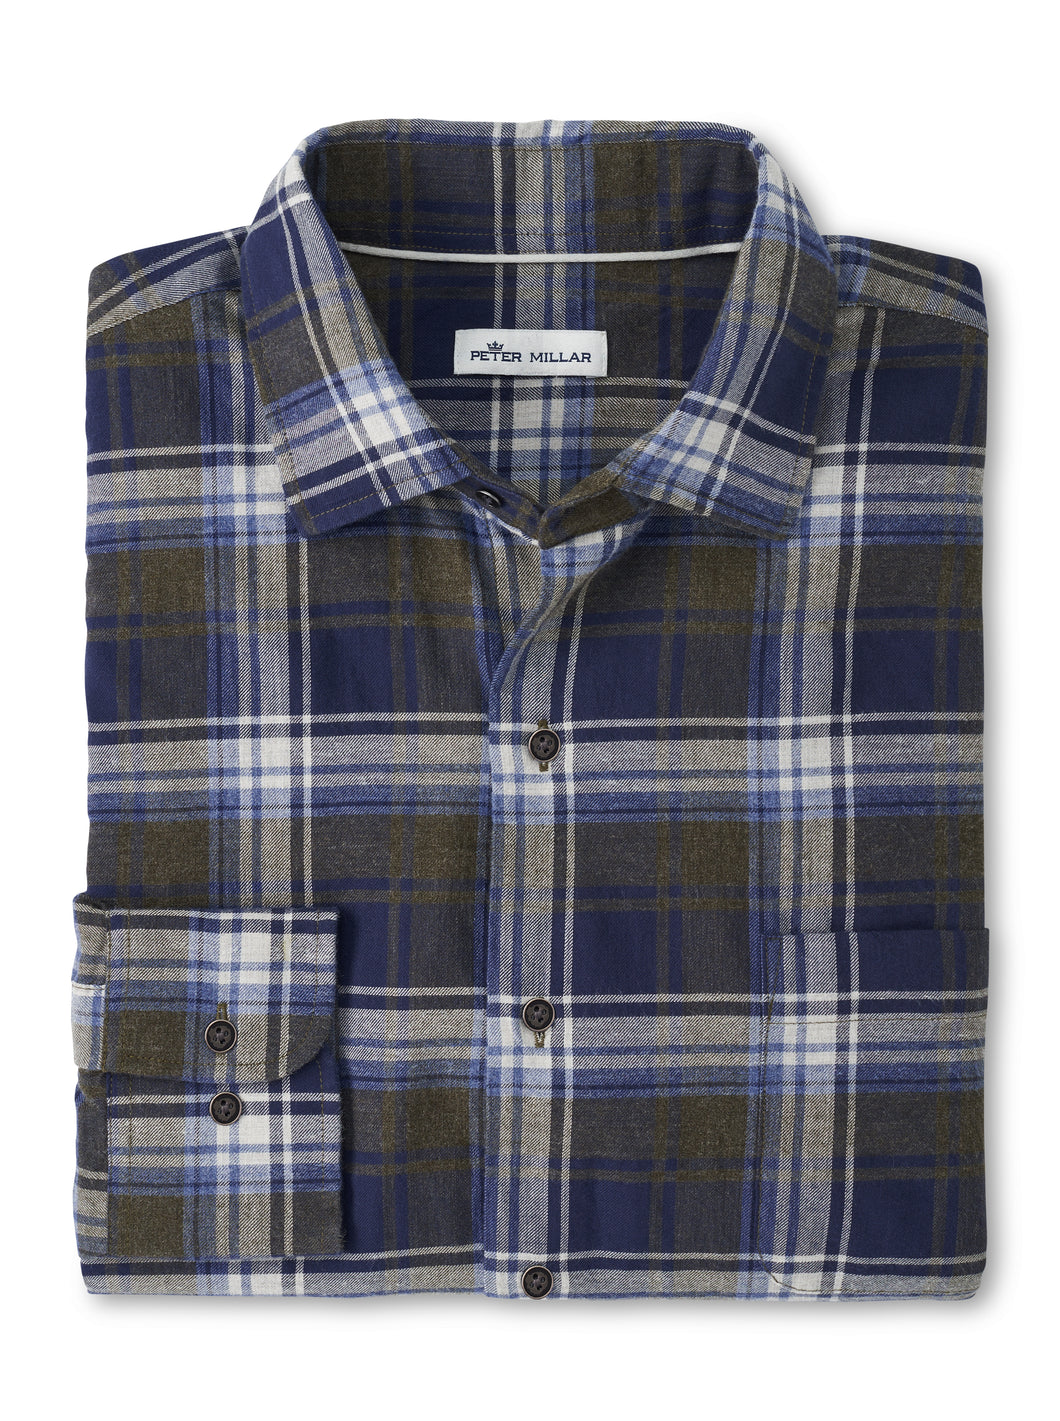 Peter Millar Timber Park Cotton Sport Shirt in Olive Branch